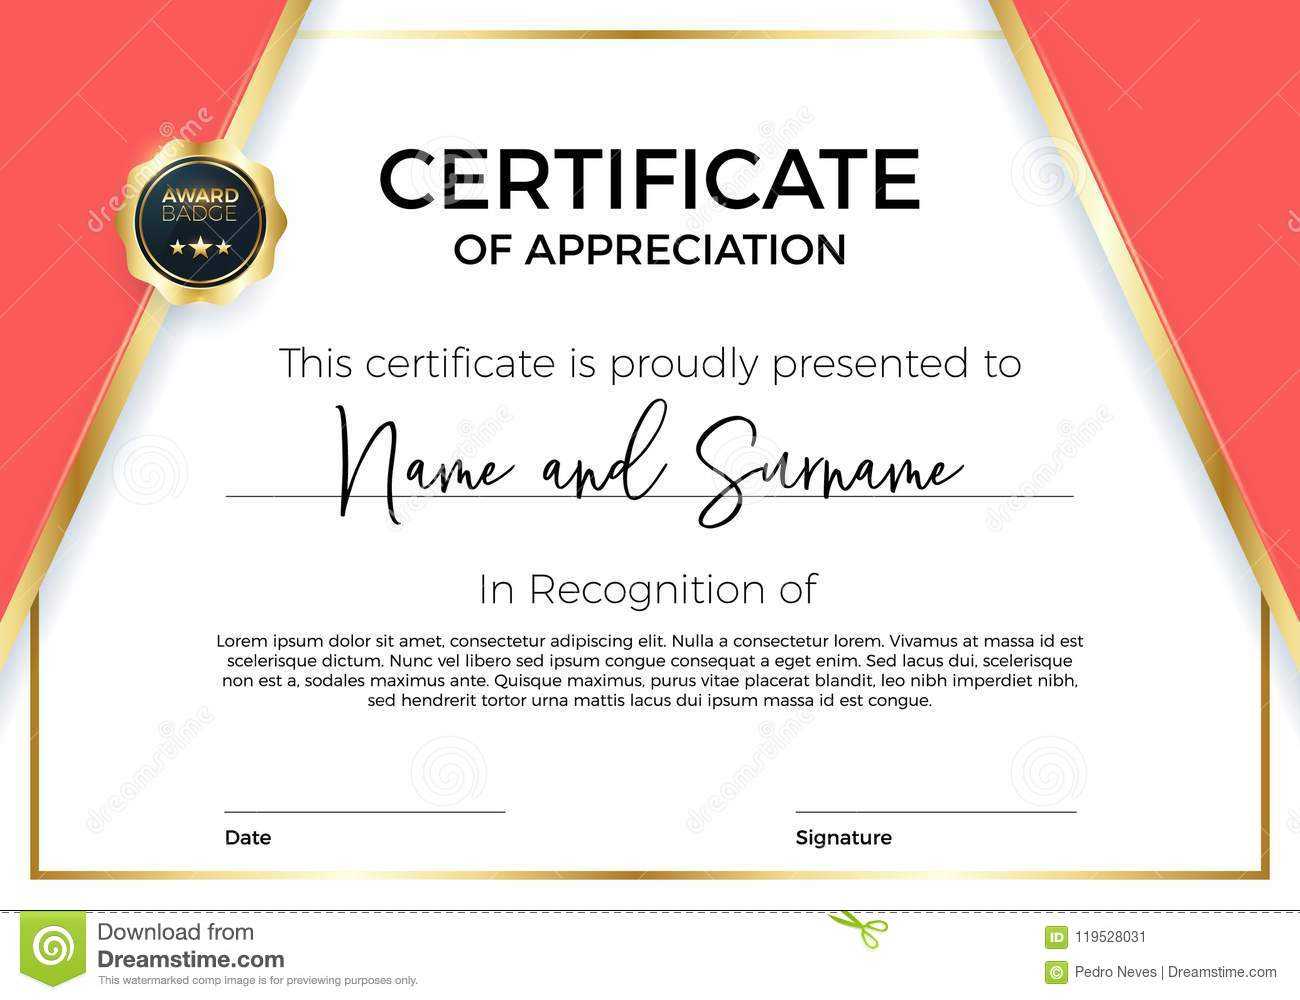 Certificate Of Appreciation Or Achievement With Award Badge Throughout Academic Award Certificate Template